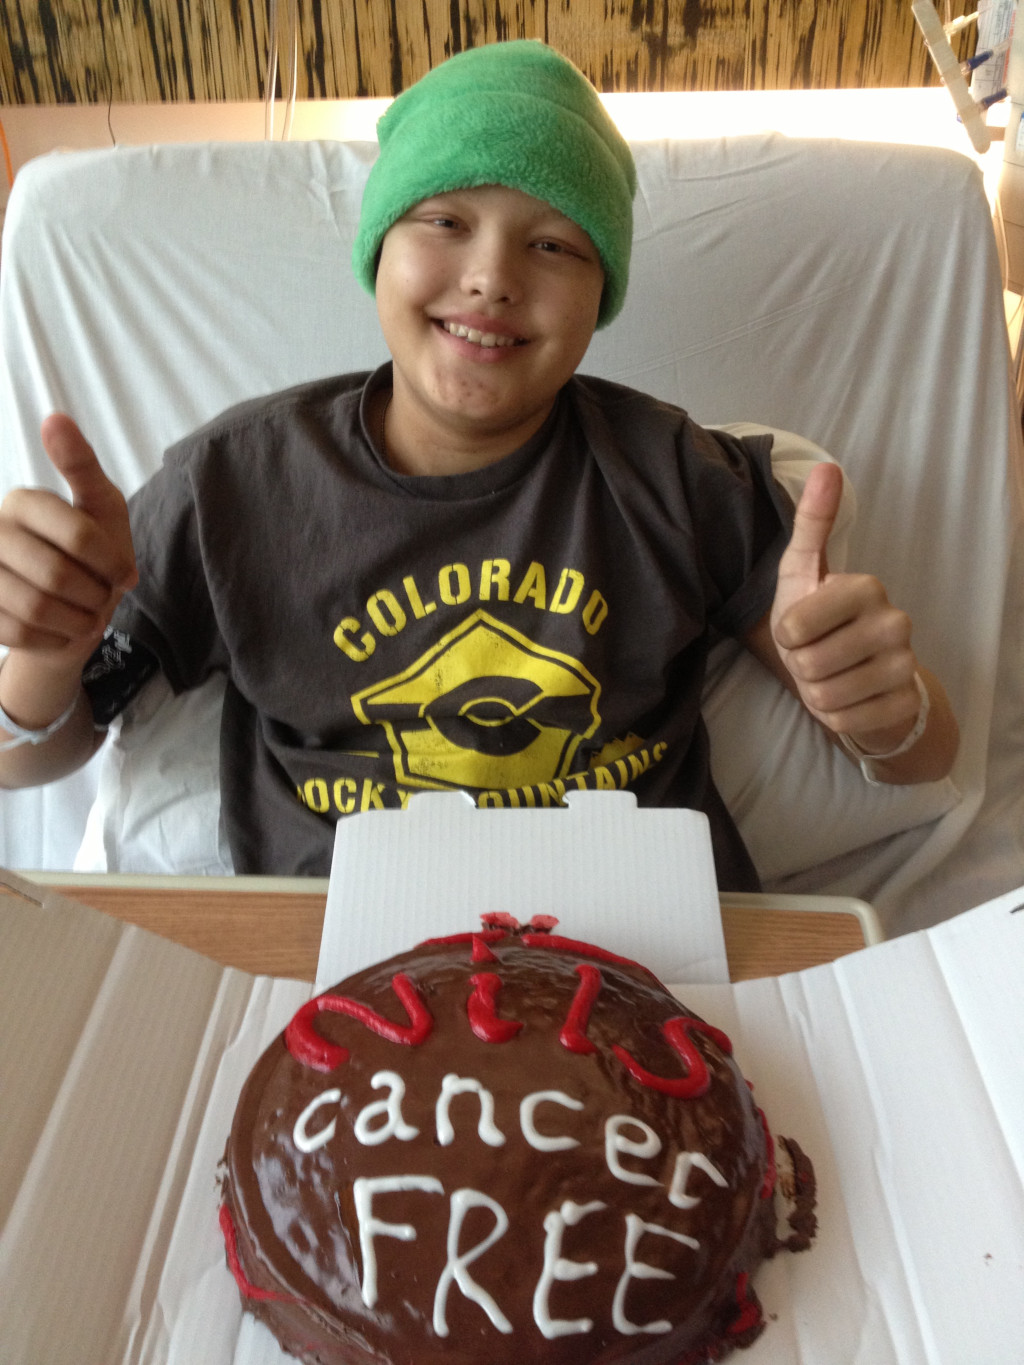 Nils is cancer free